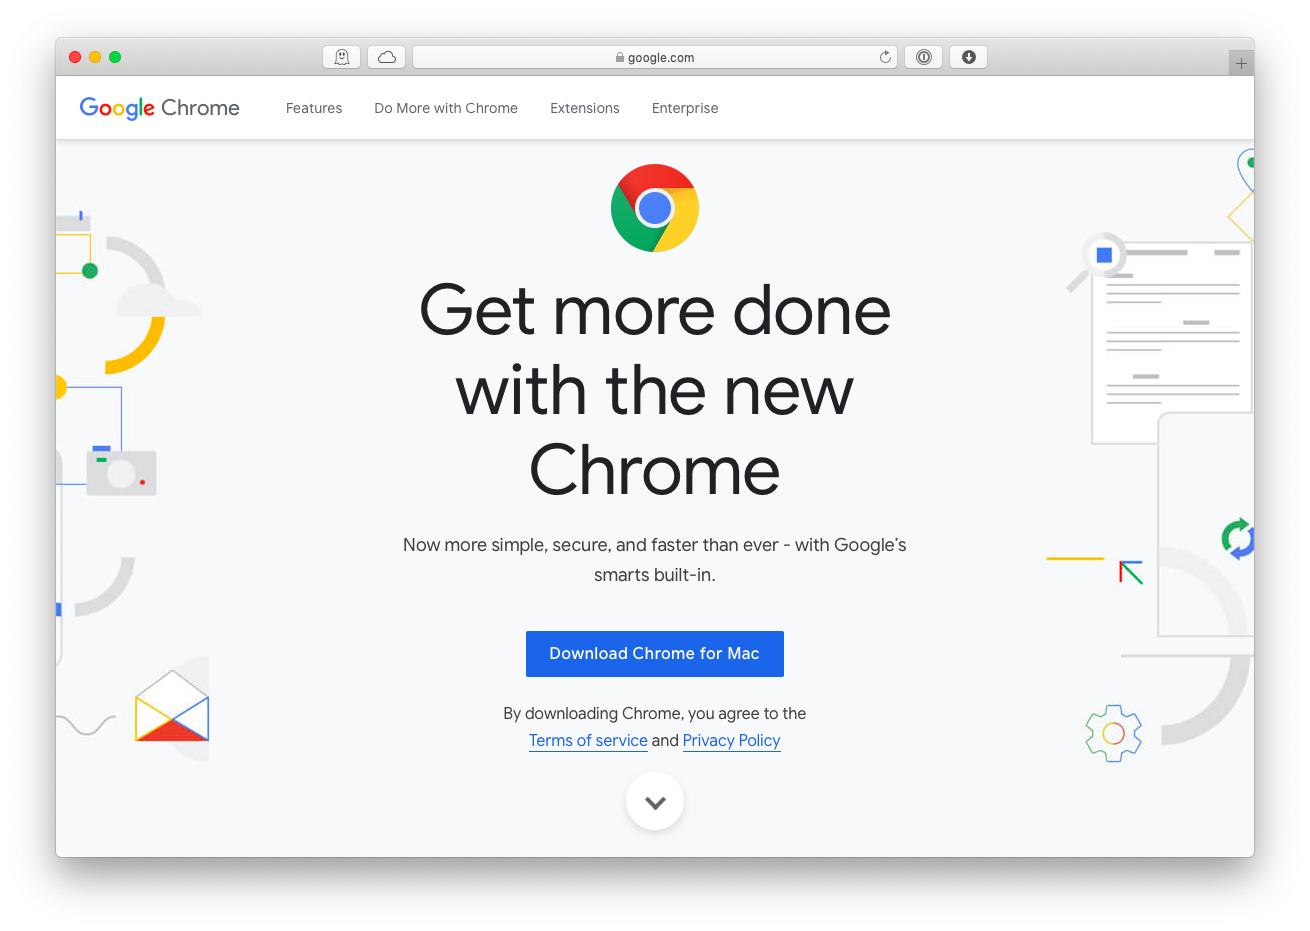 how can i set a default size for chrome on a mac